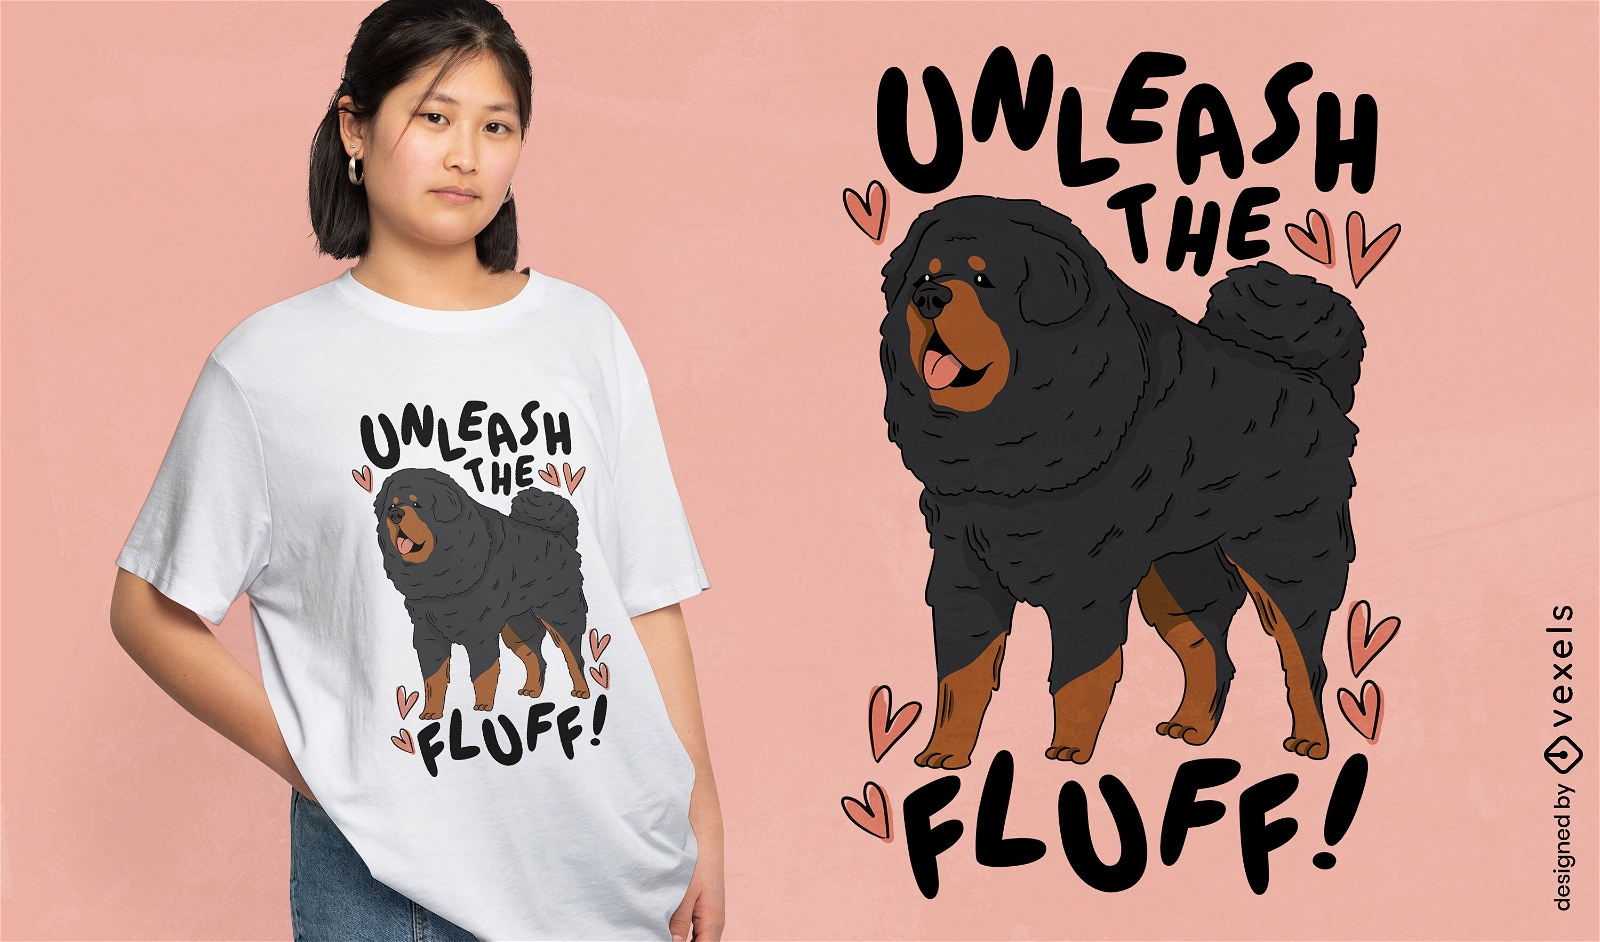 Fluffy dog quote t-shirt design